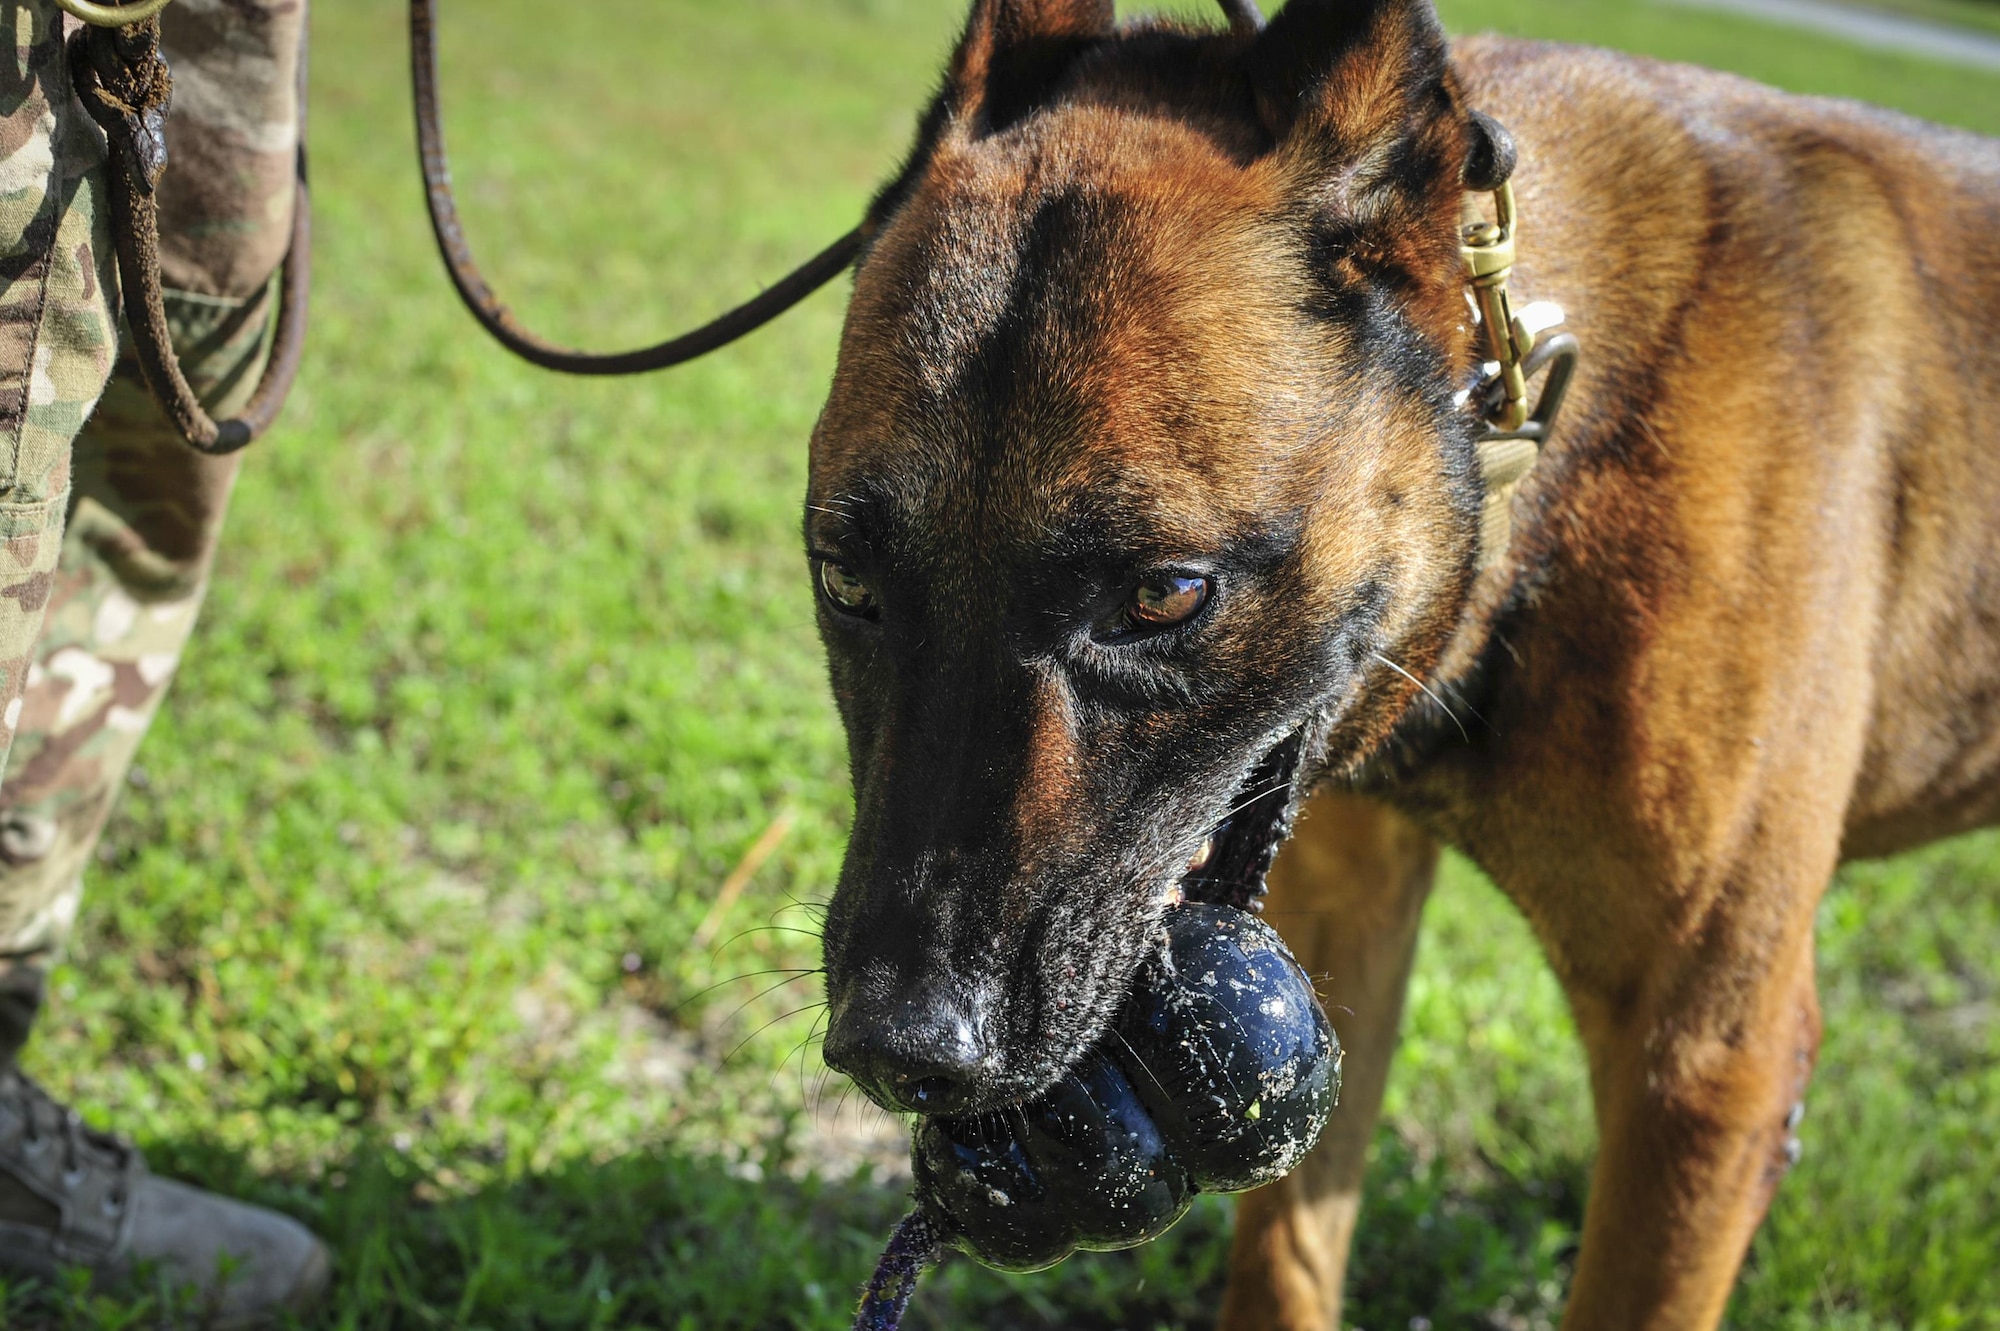 Ziko, a military working dog with the 1st Special Operations Security Forces Squadron, chews on his toy following bite training at Hurlburt Field, Fla., Aug. 22, 2016. Positive reinforcement is one of the primary means of training MWDs.. Once a dog has performed his duties correctly during training and demonstrations, they are rewarded with a toy for complying with their handler. (U.S. Air Force photo by Airman 1st Class Joseph Pick)